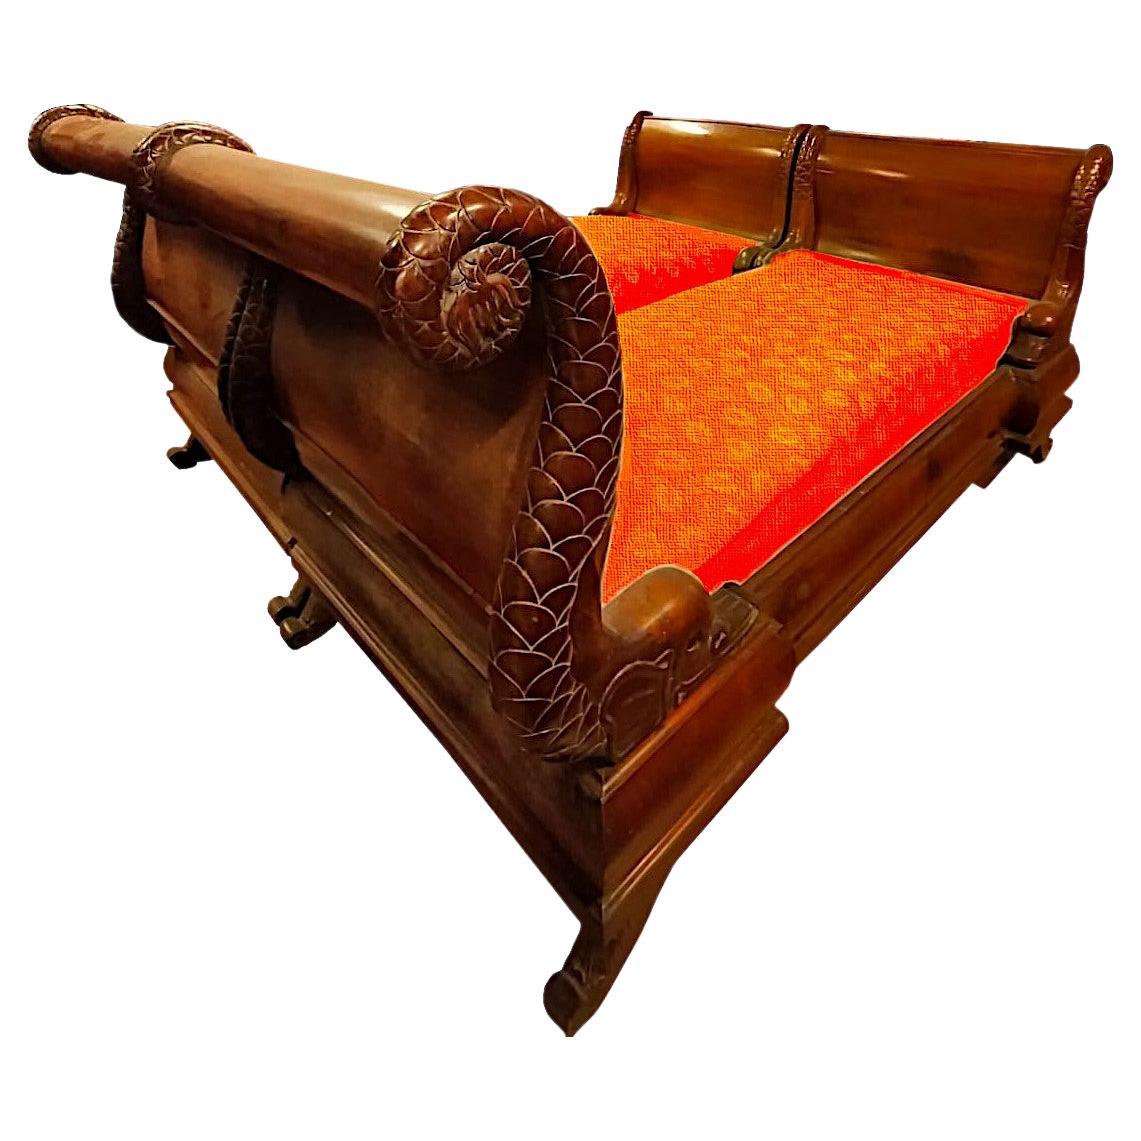 Important pair of boat beds with large carved dolphins, Empire, from 1810 Italy (Parma)

Circa 1810, in solid walnut with large carved dolphins forming the headboard and footboard.
The feet of the bed are also solid wood carved in typical Empire